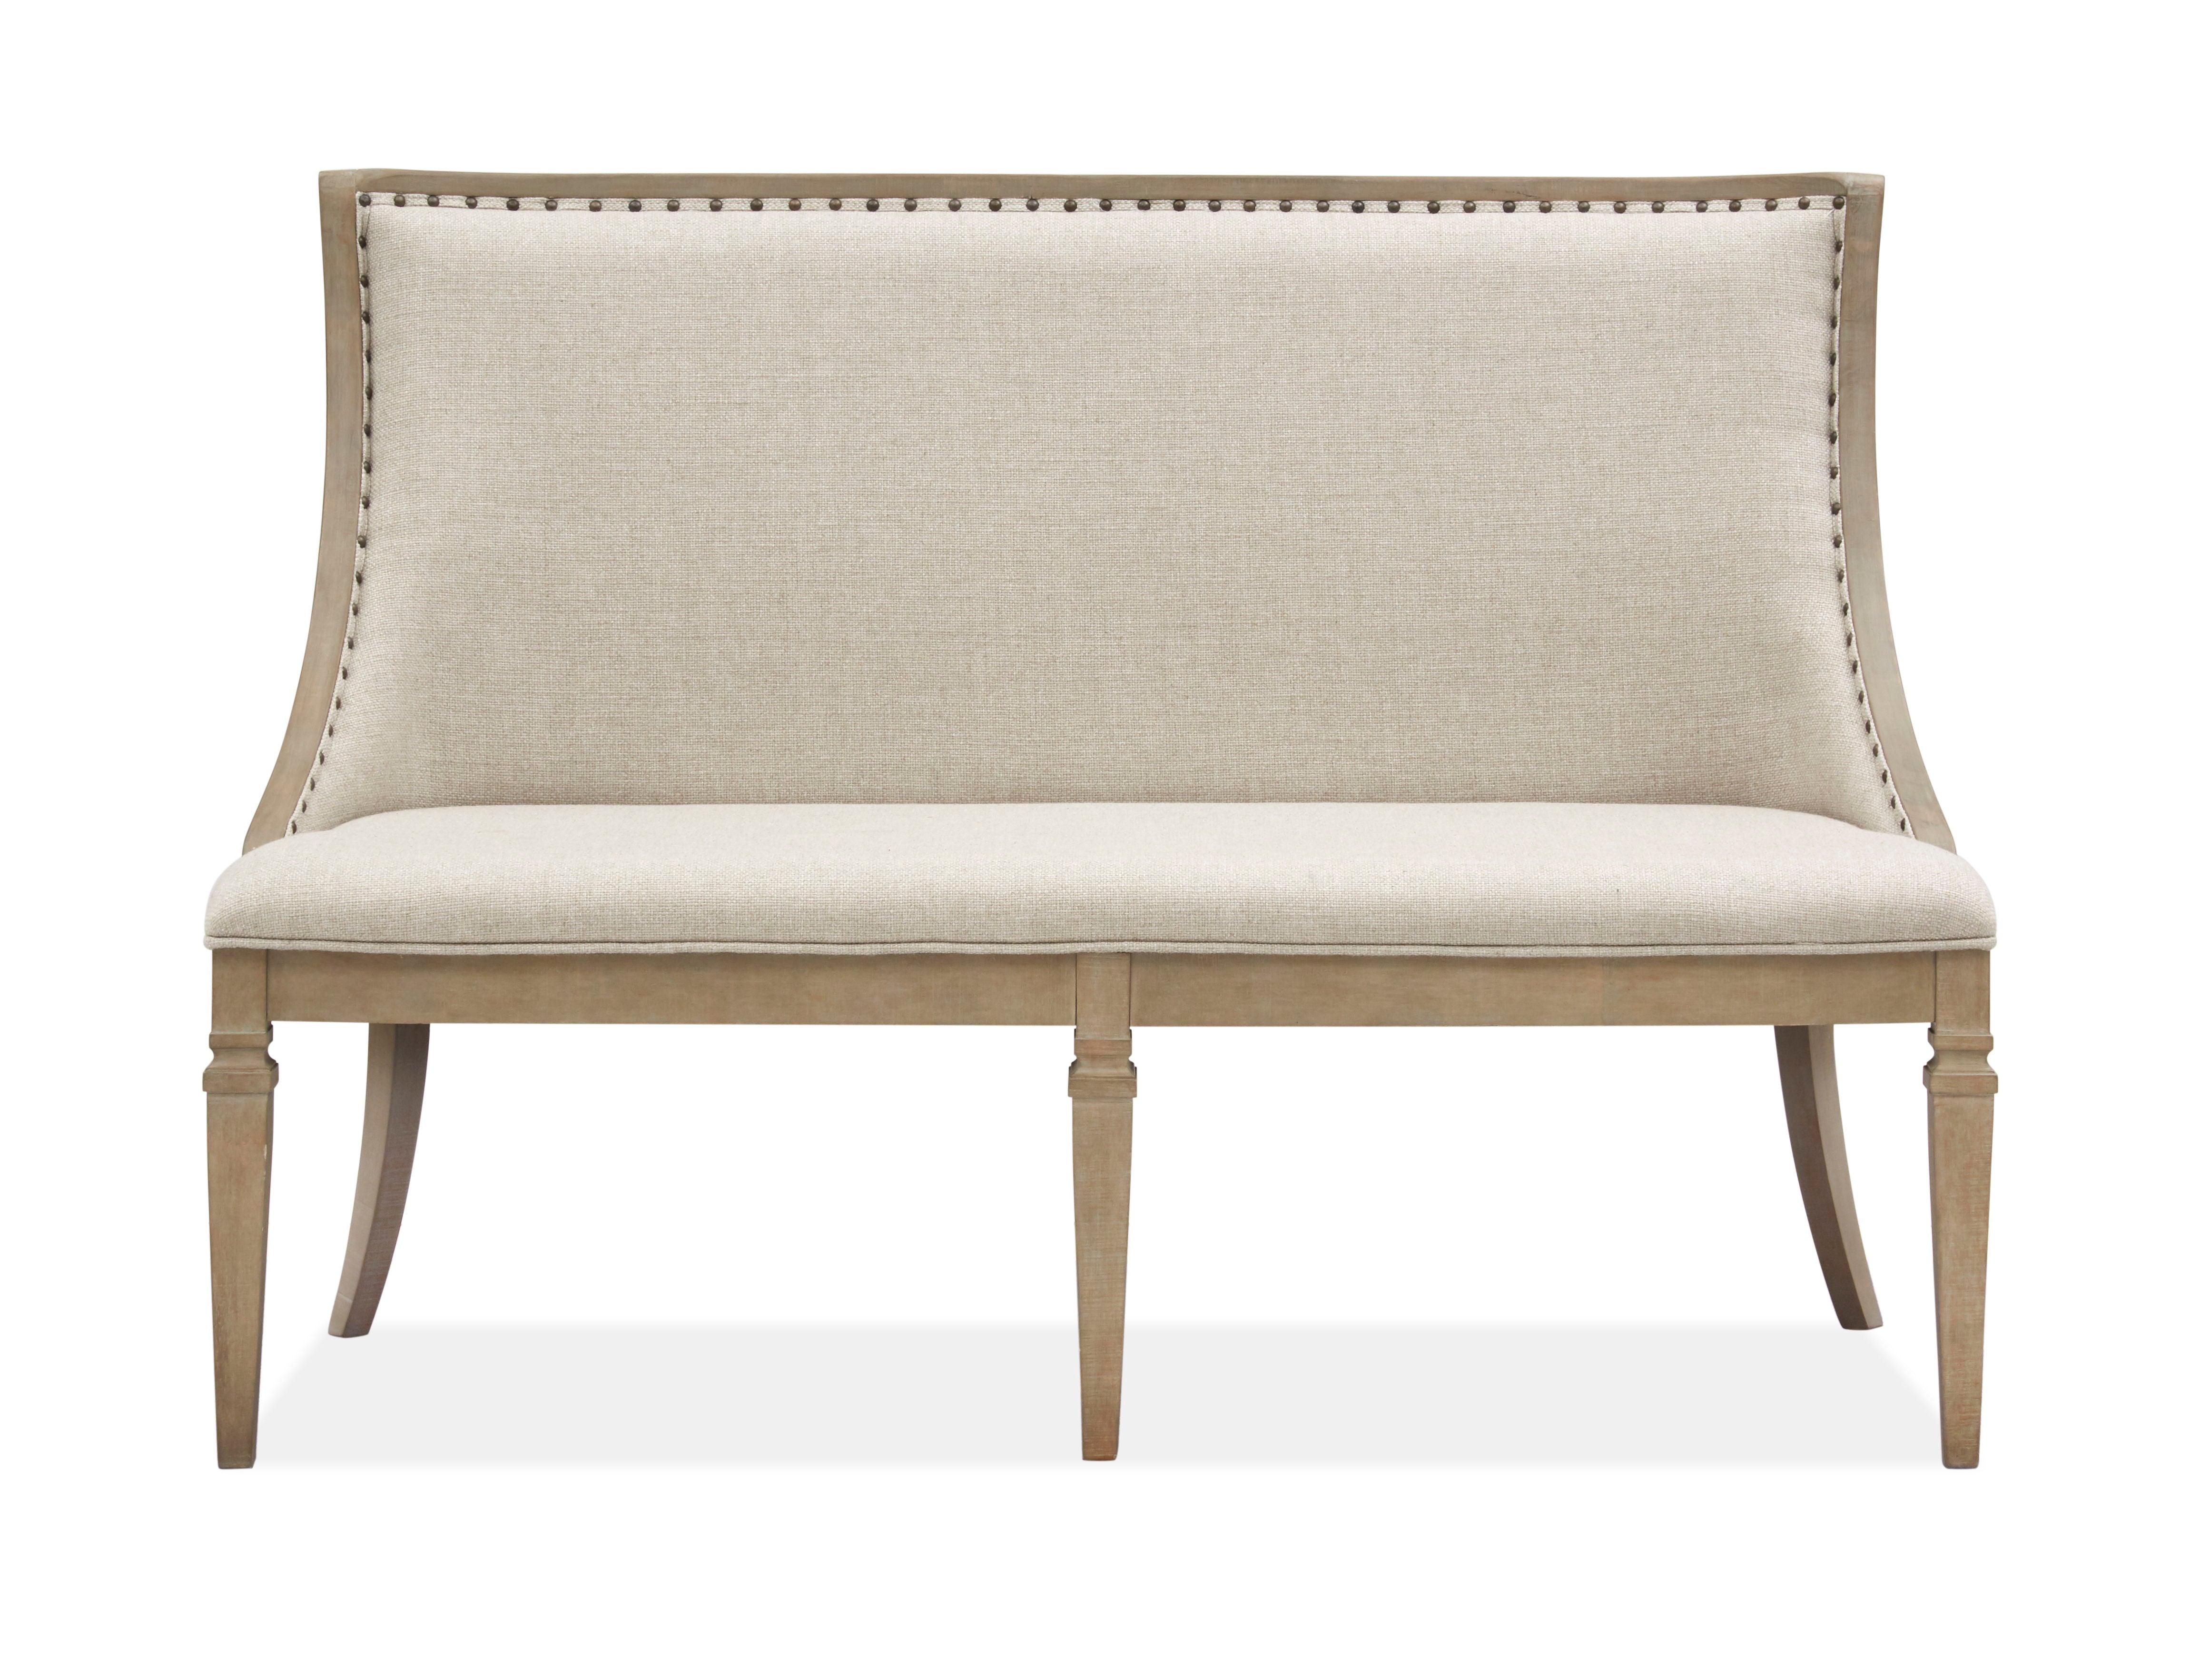 Magnussen Furniture - Lancaster - Bench With Upholstered Seat & Back - Dovetail Grey - 5th Avenue Furniture